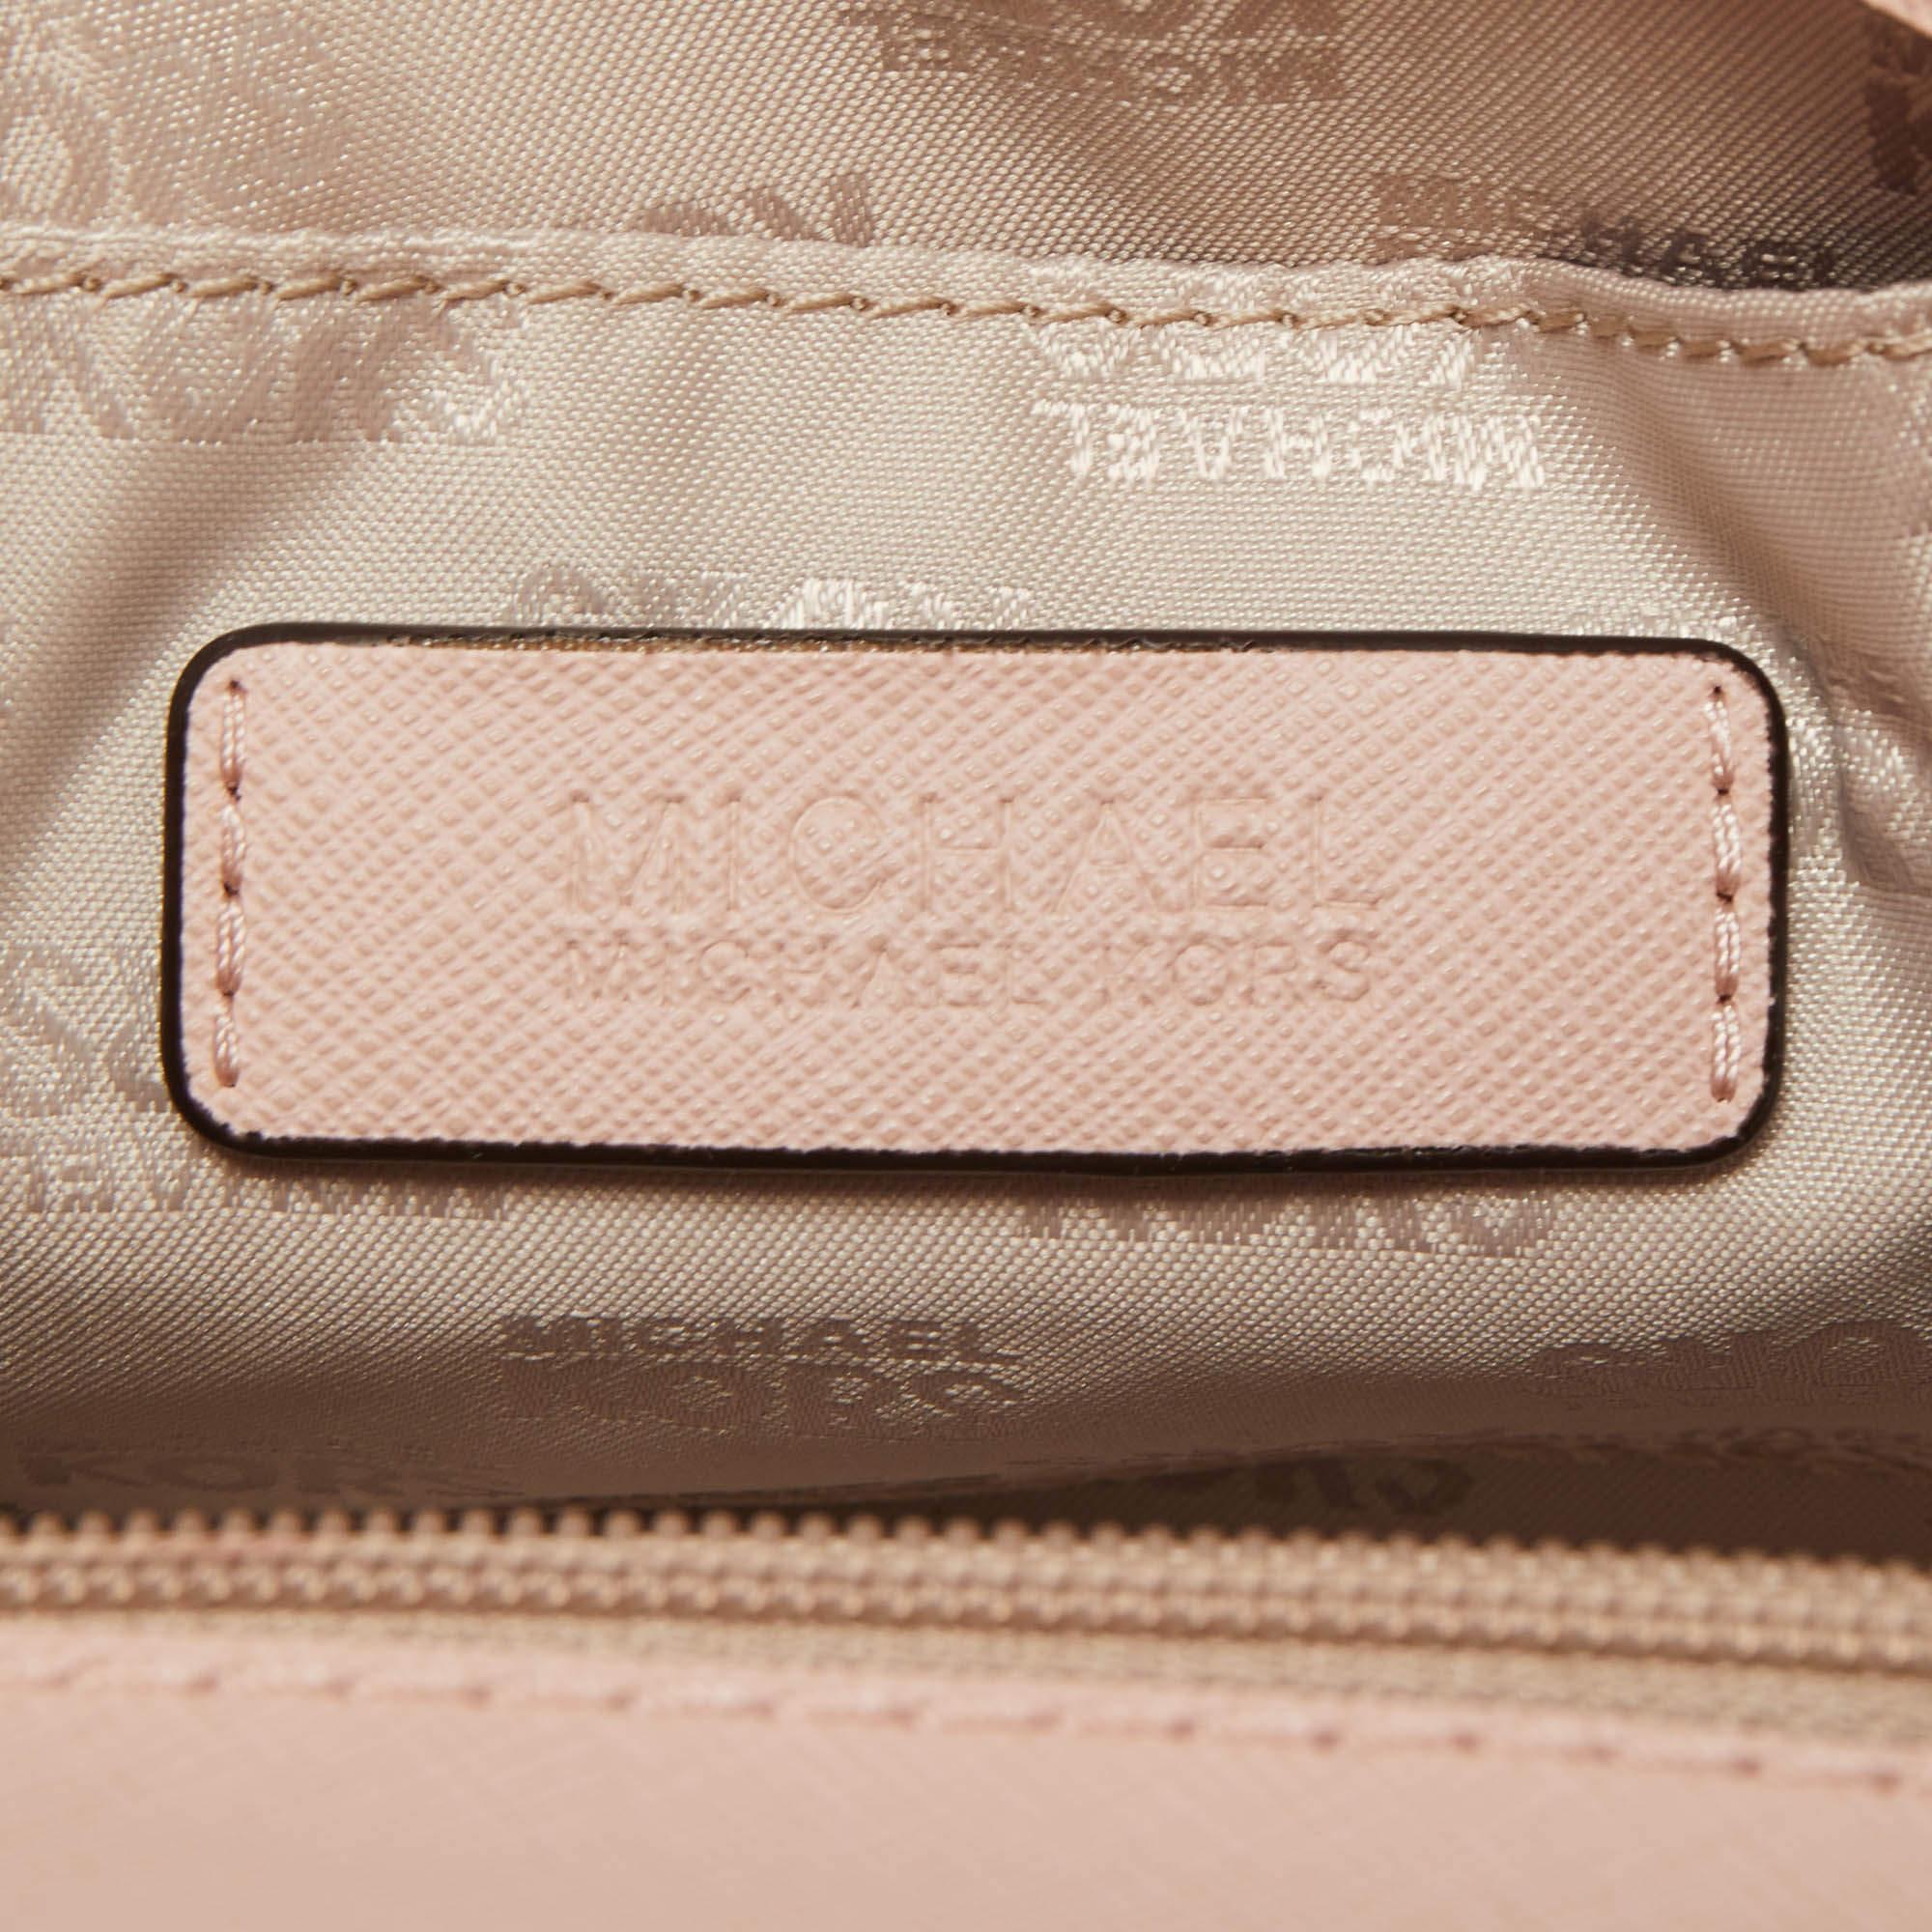 MICHAEL Michael Kors Dusty Pink Leather Studded Tina Ballet Clutch Bag For Sale 4